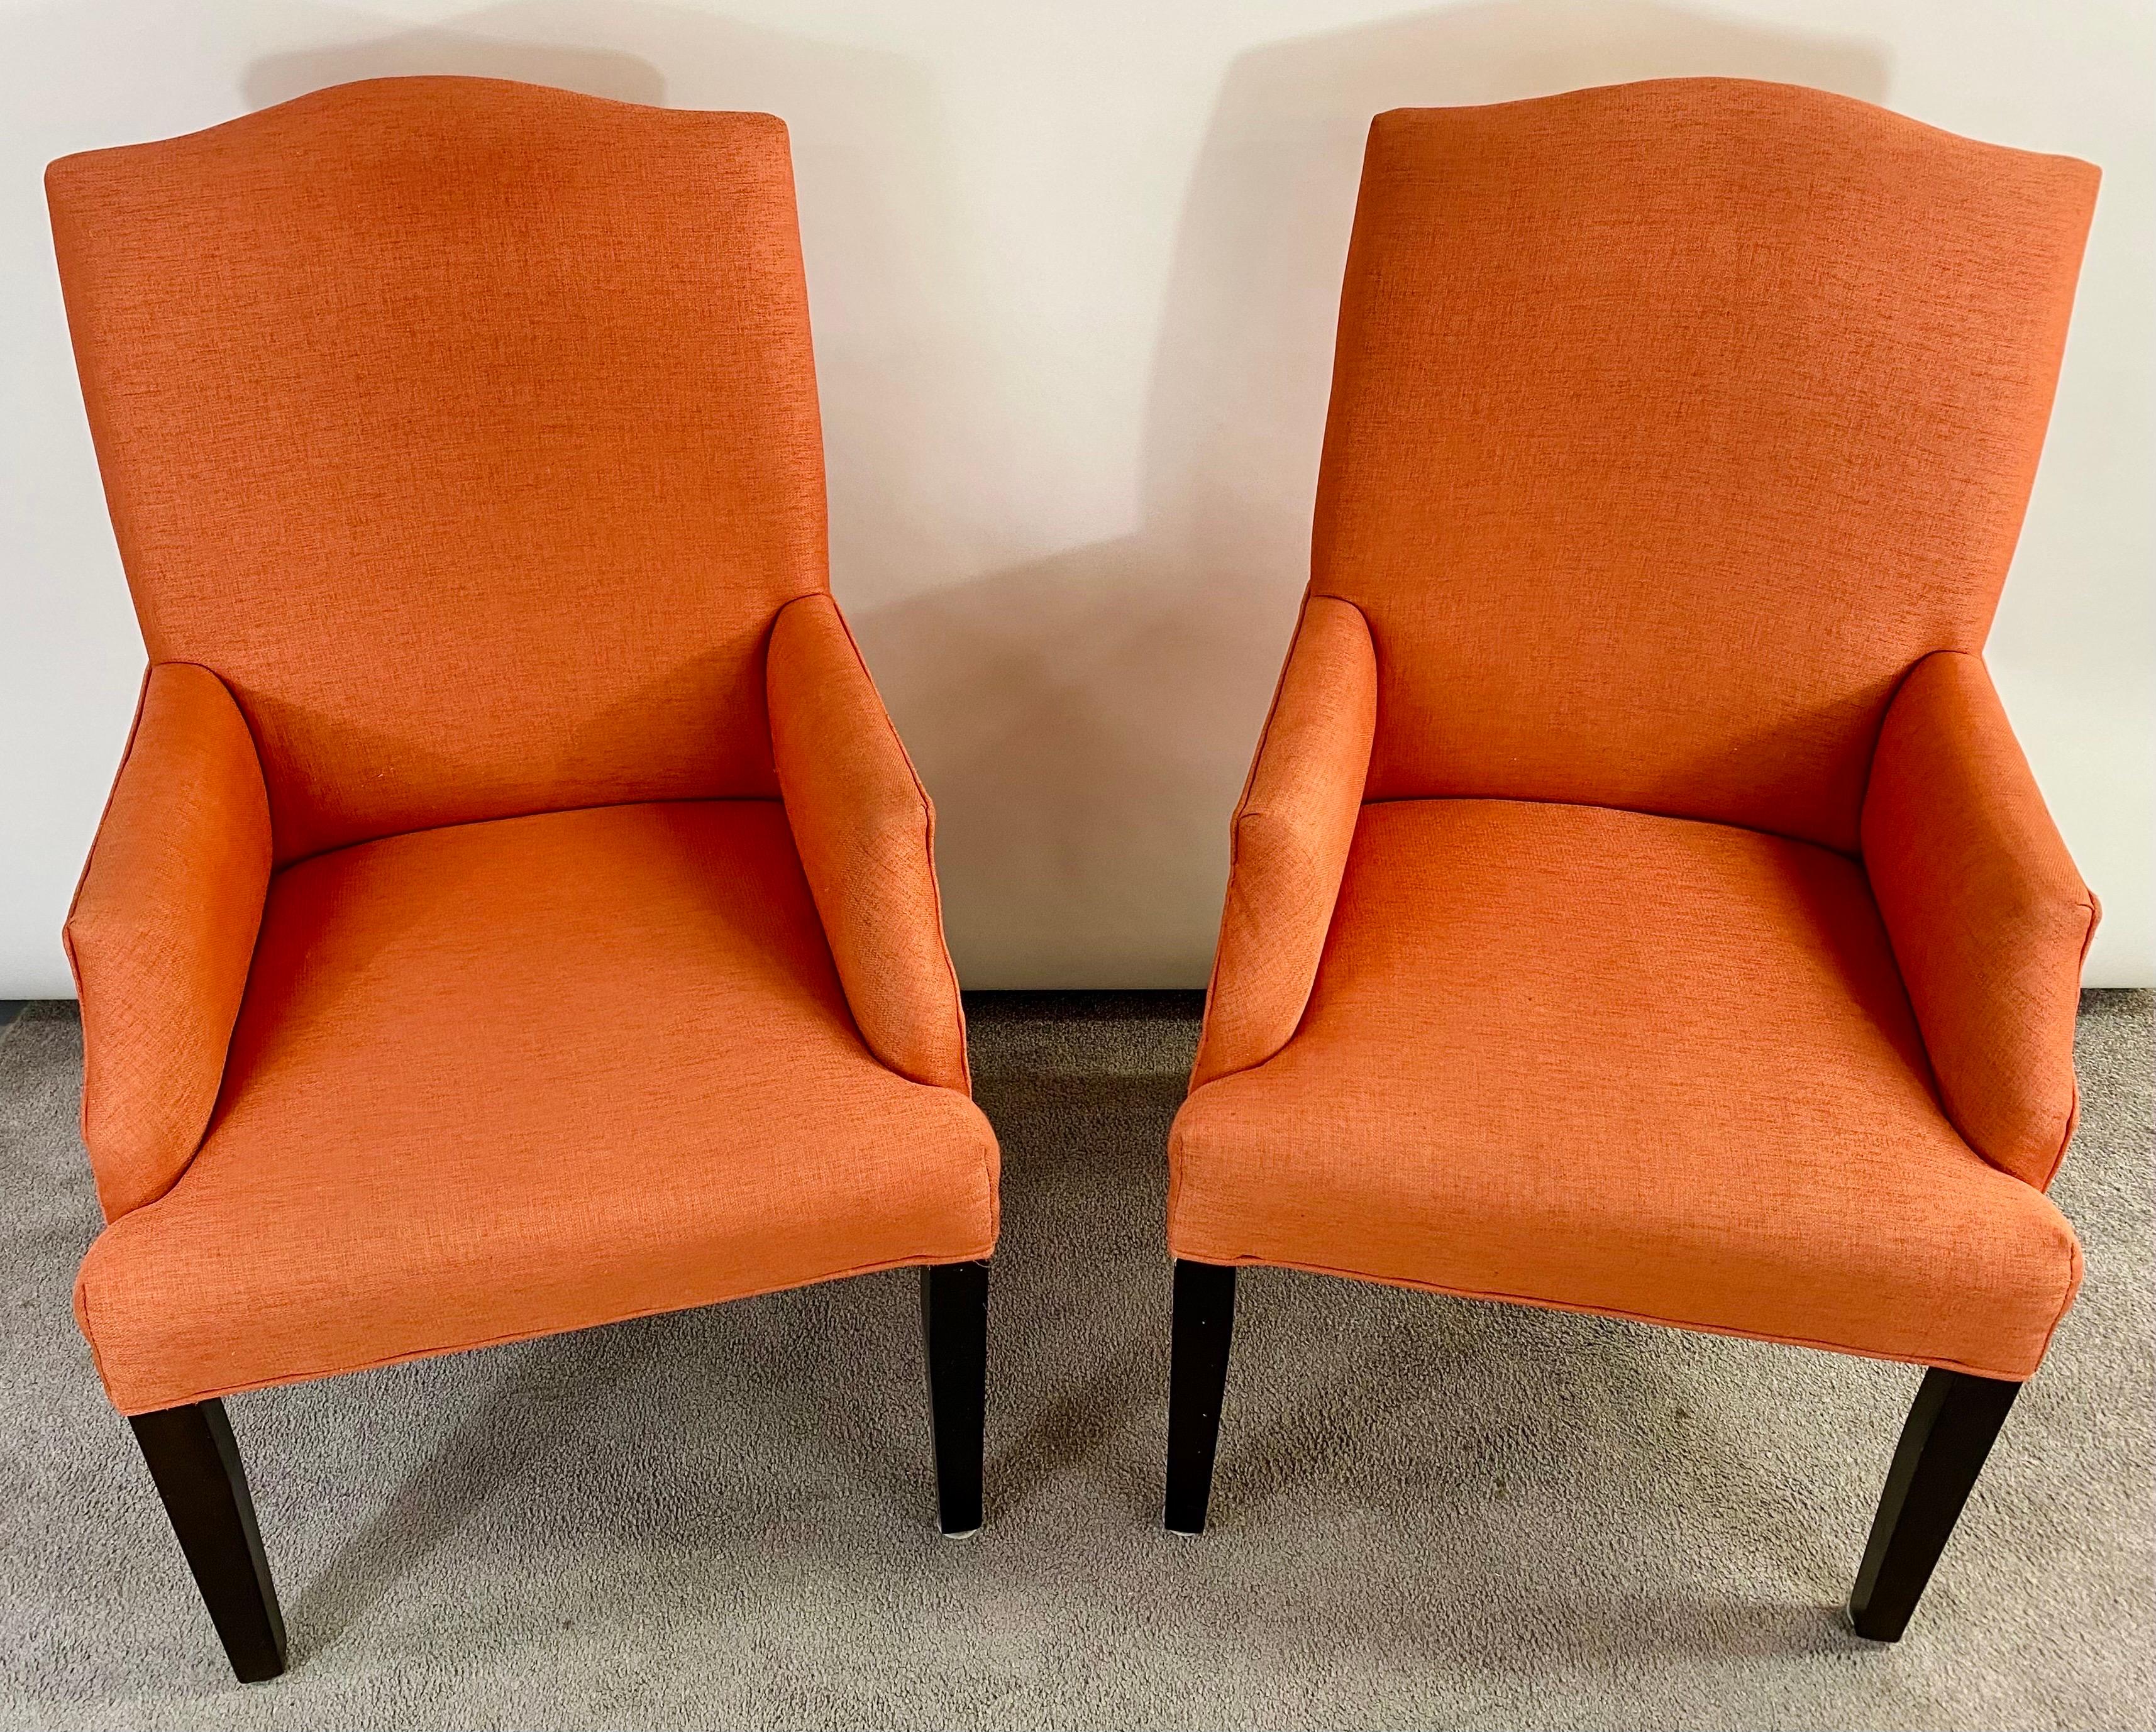 A timeless Mid-Century Modern lounge or side chairs in the style of Edward Wormly ( American , 1907 - 1995). The chairs feature a very stylish orange Hermes color upholstery. The chairs combine both style and comfort with a high back and perfect